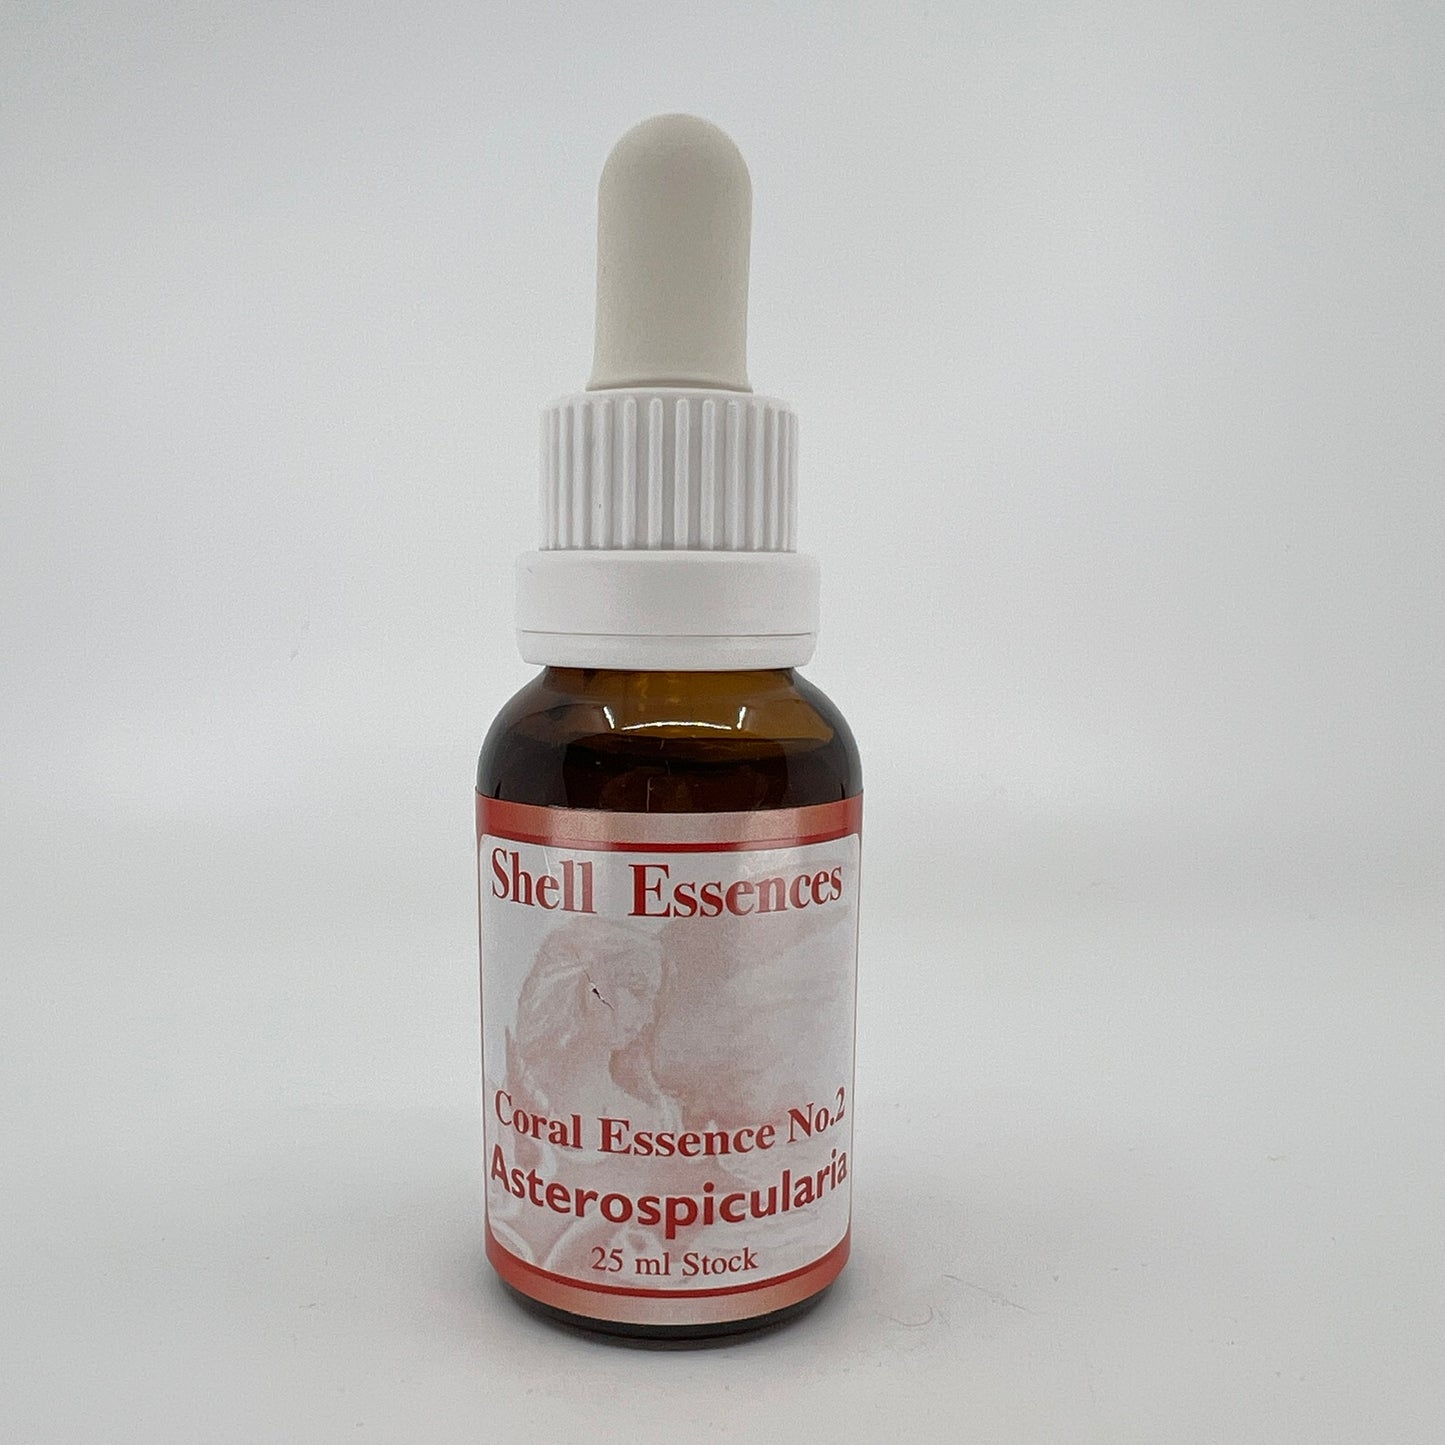 Asterospicularia coral essence 25ml